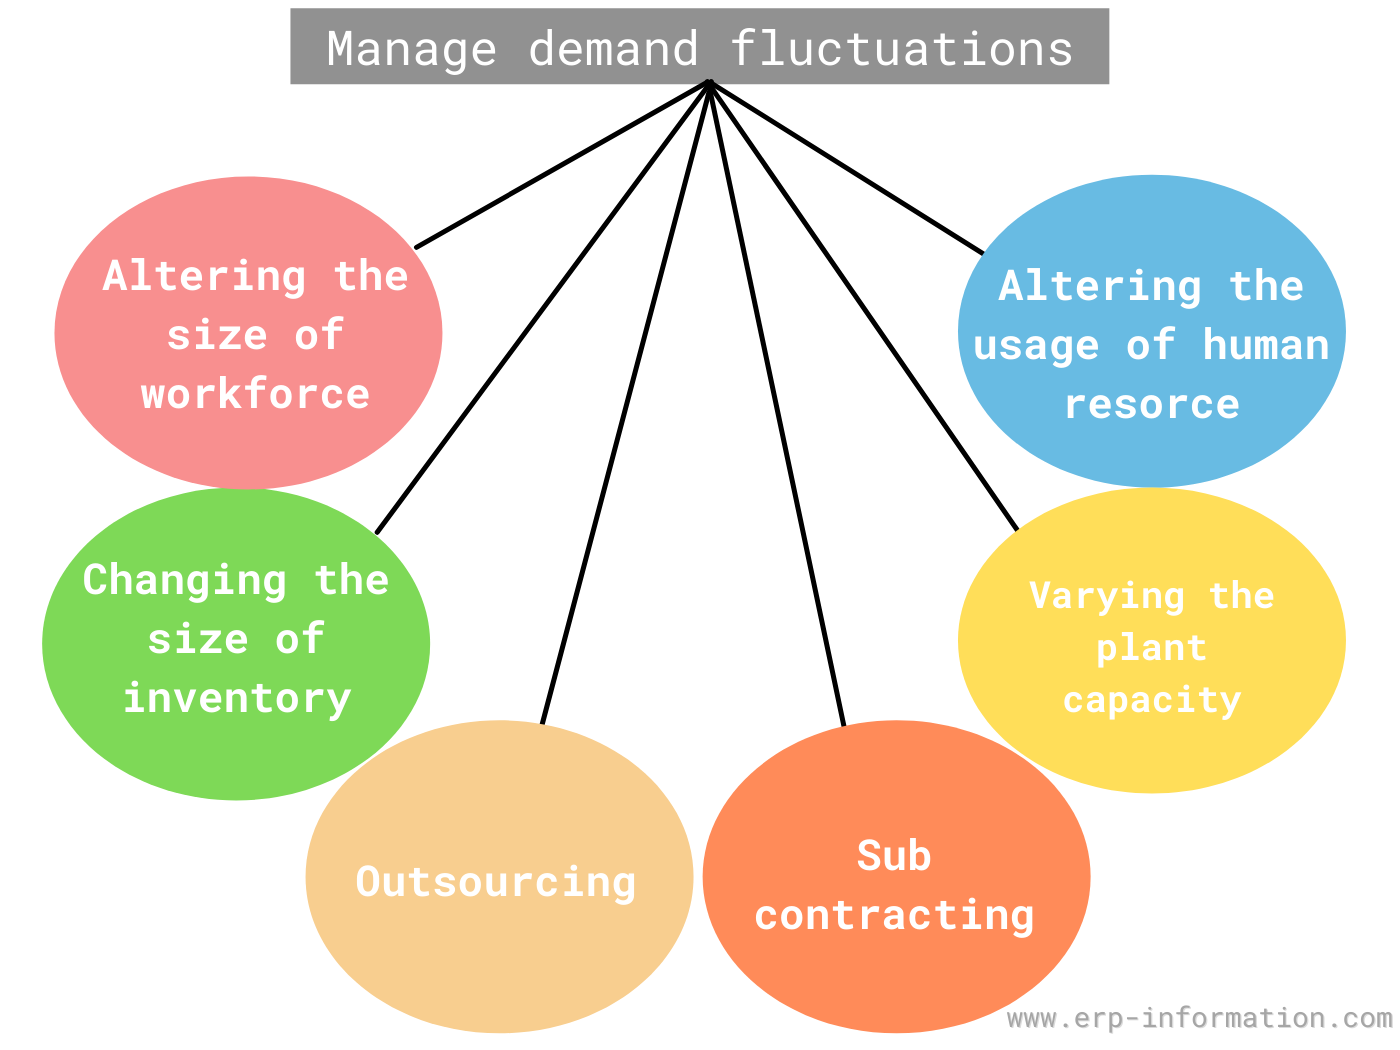 what is aggregate planning in operations management